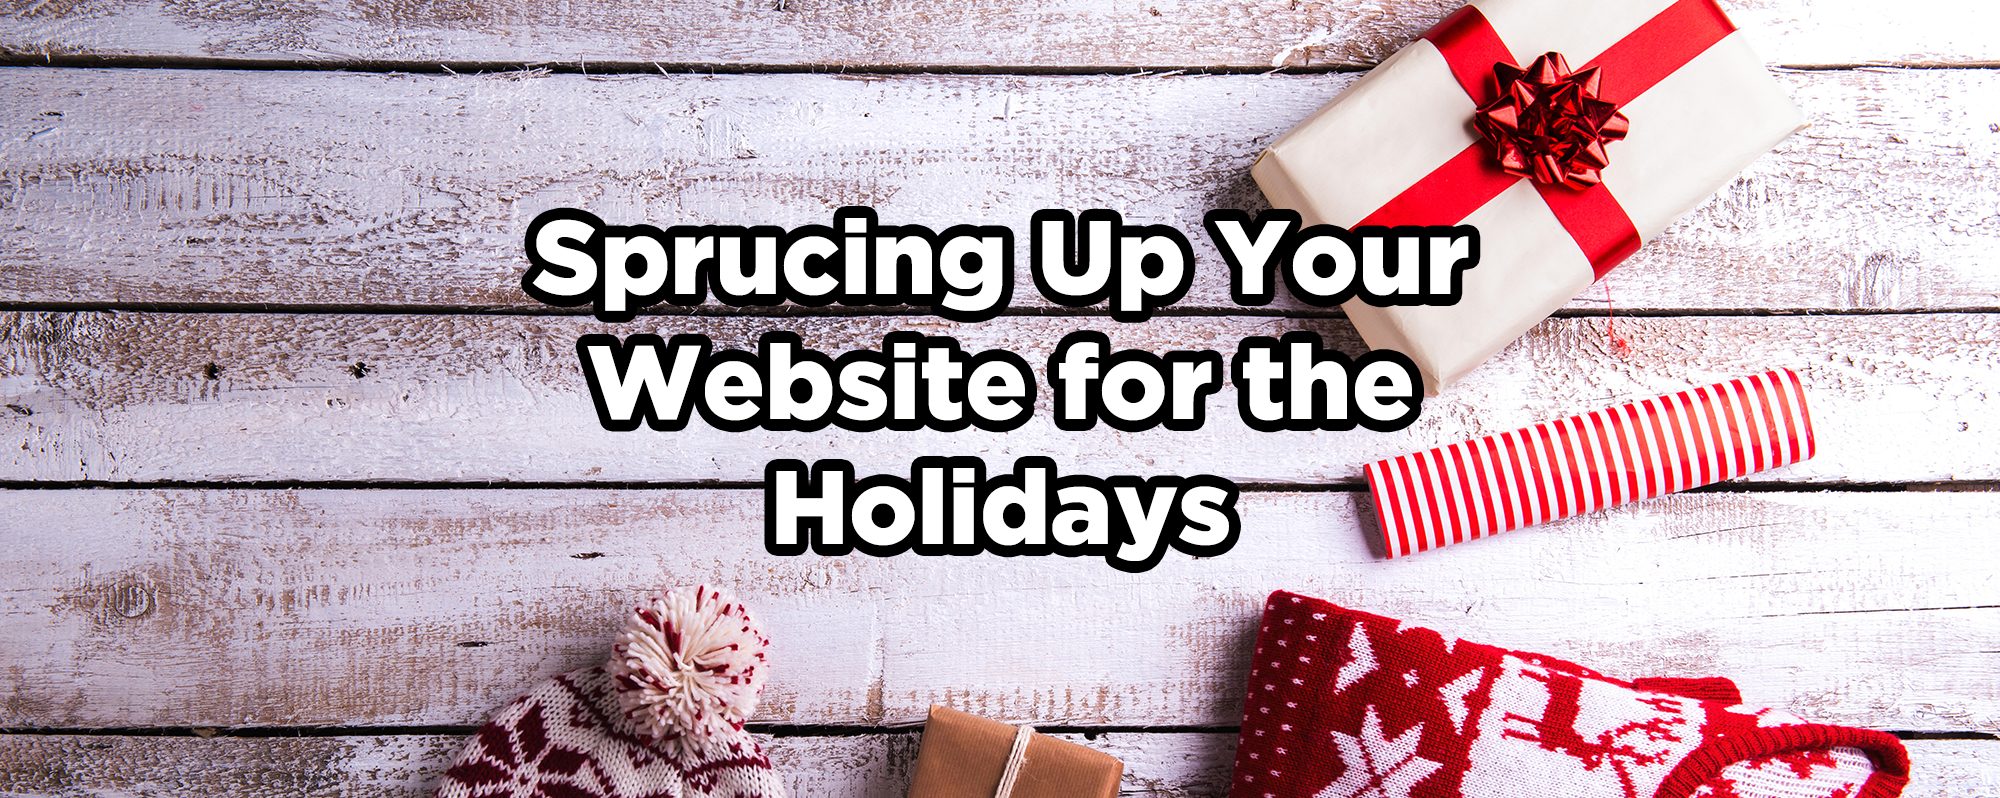 Text - Sprucing Up Your Website for the Holidays